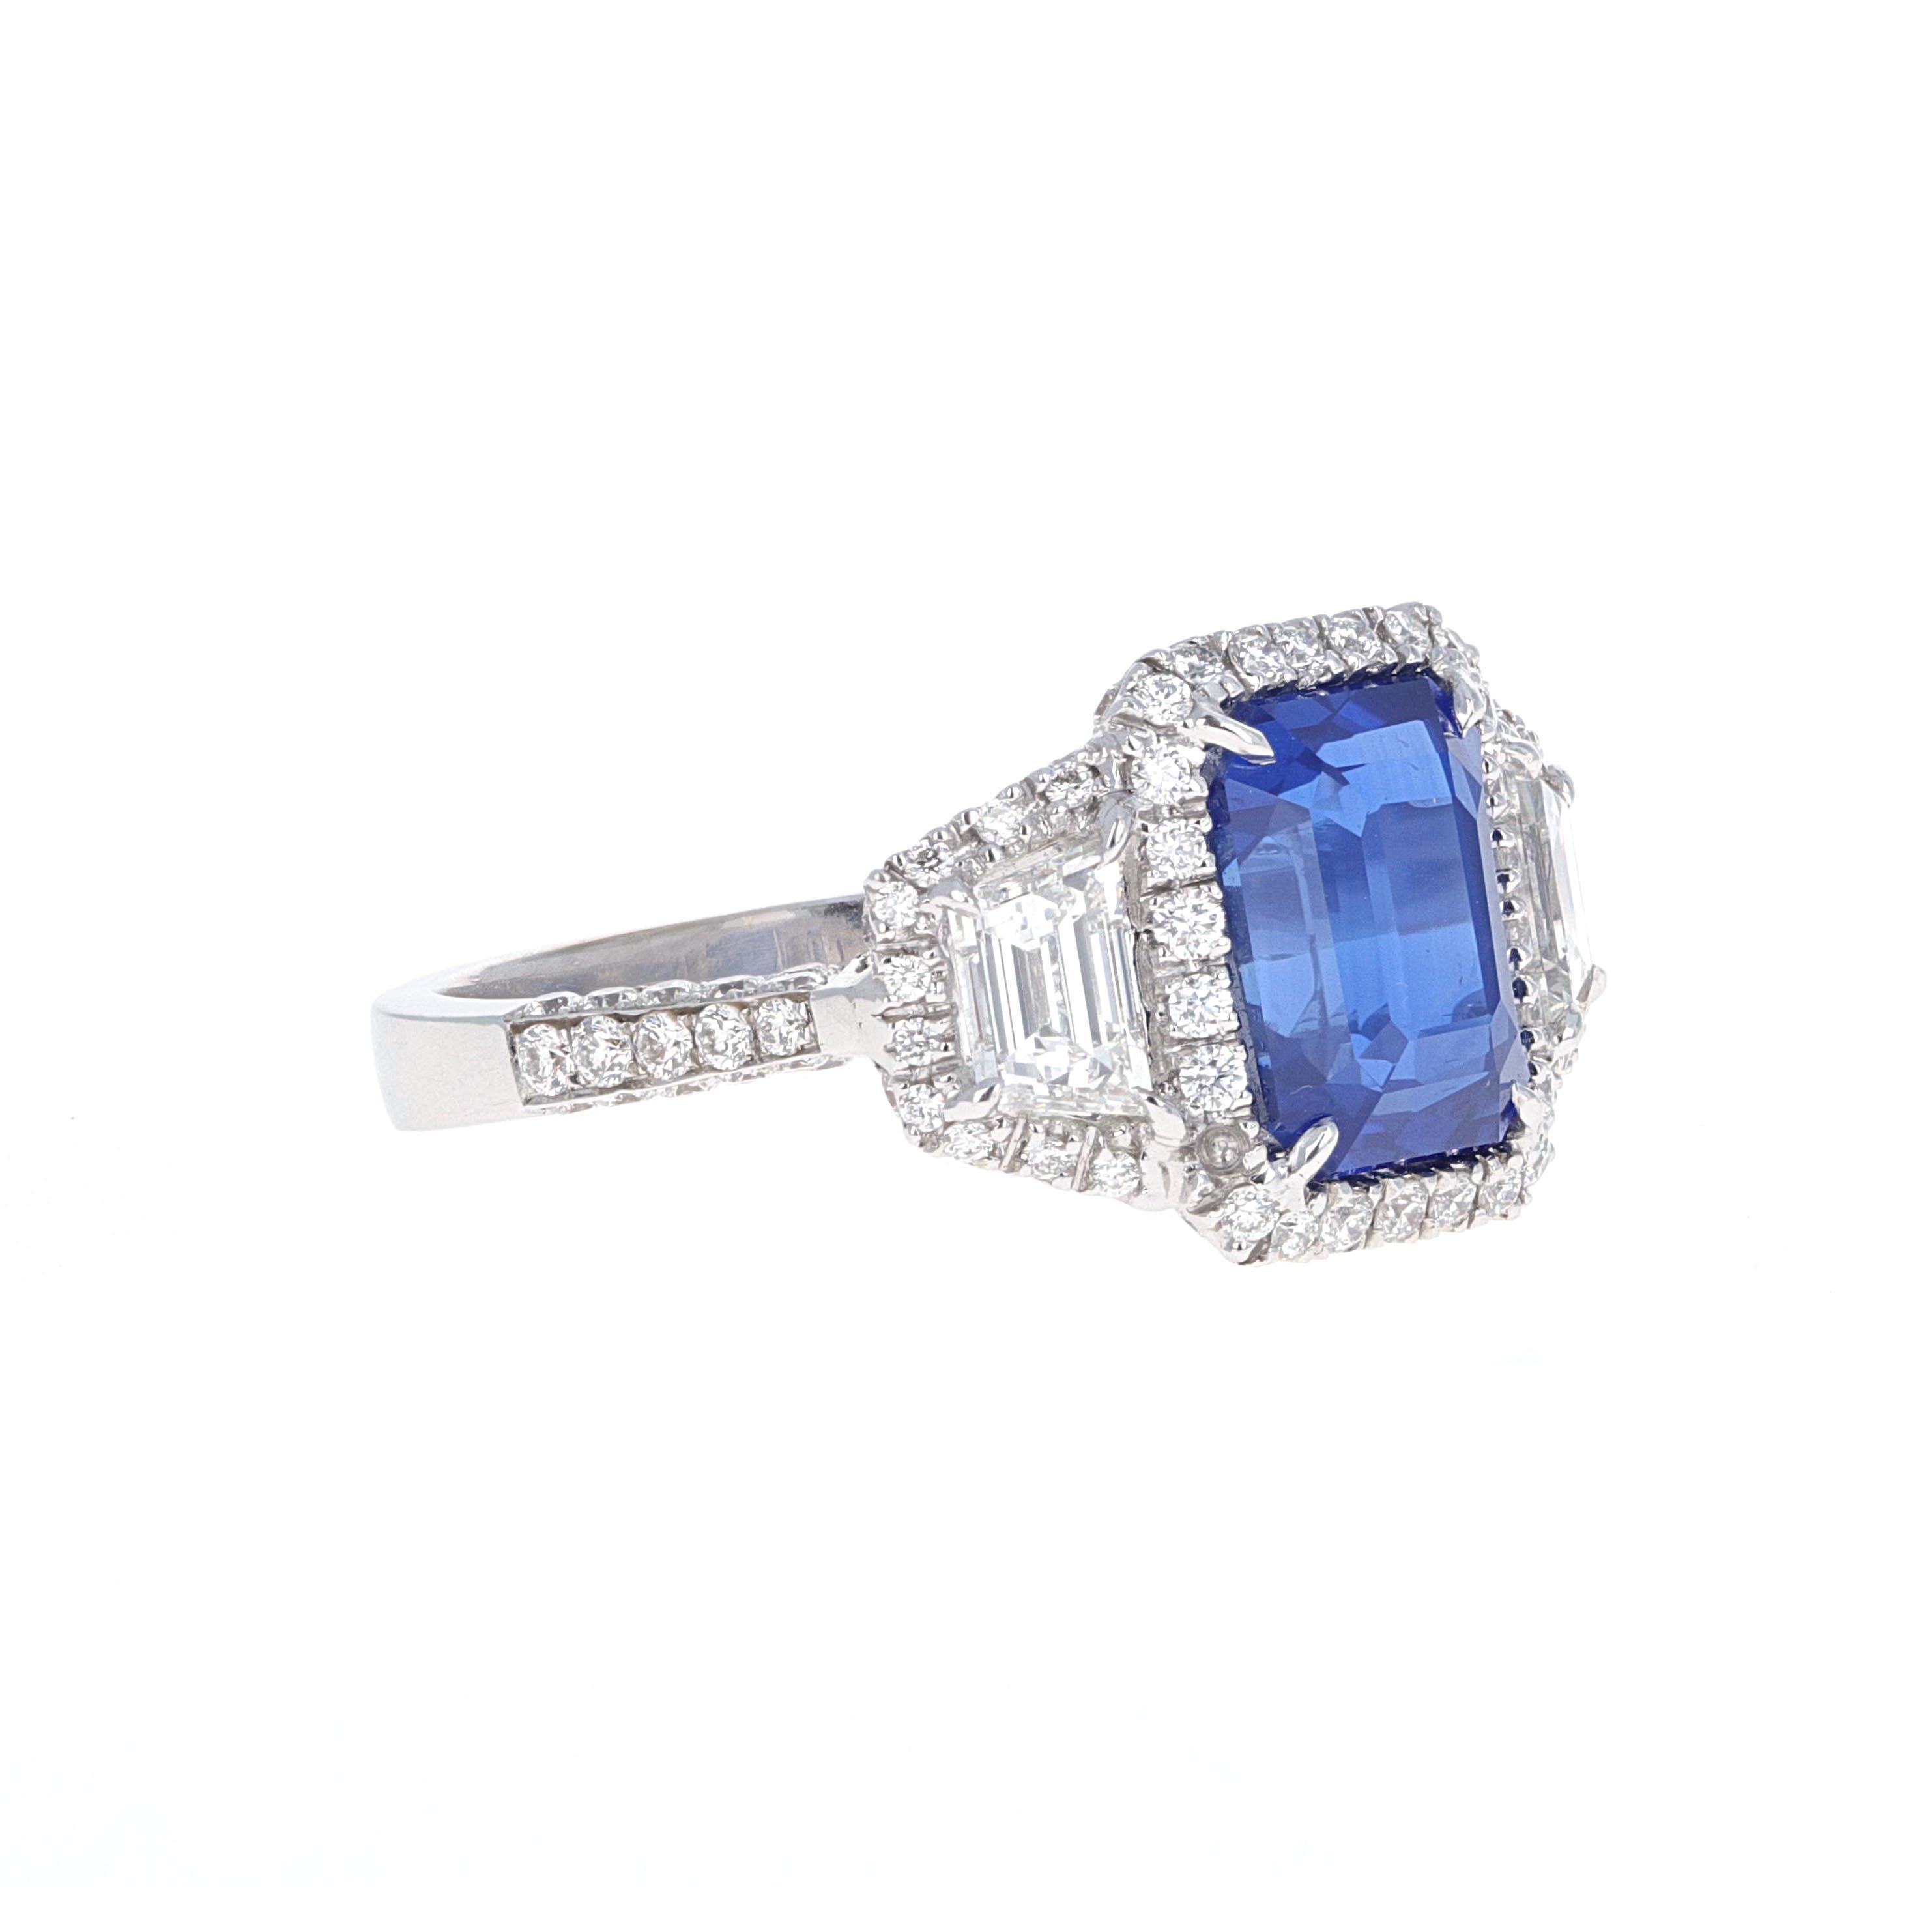 Handmade beautiful blue emerald cut sapphire three-stone diamond ring by Elizabeth Taylor Collection, House of Taylor. The blue sapphire is an emerald cut weighing 4.50 carats. The House of Taylor ring has 2 Trapezoid diamonds, one on each side of